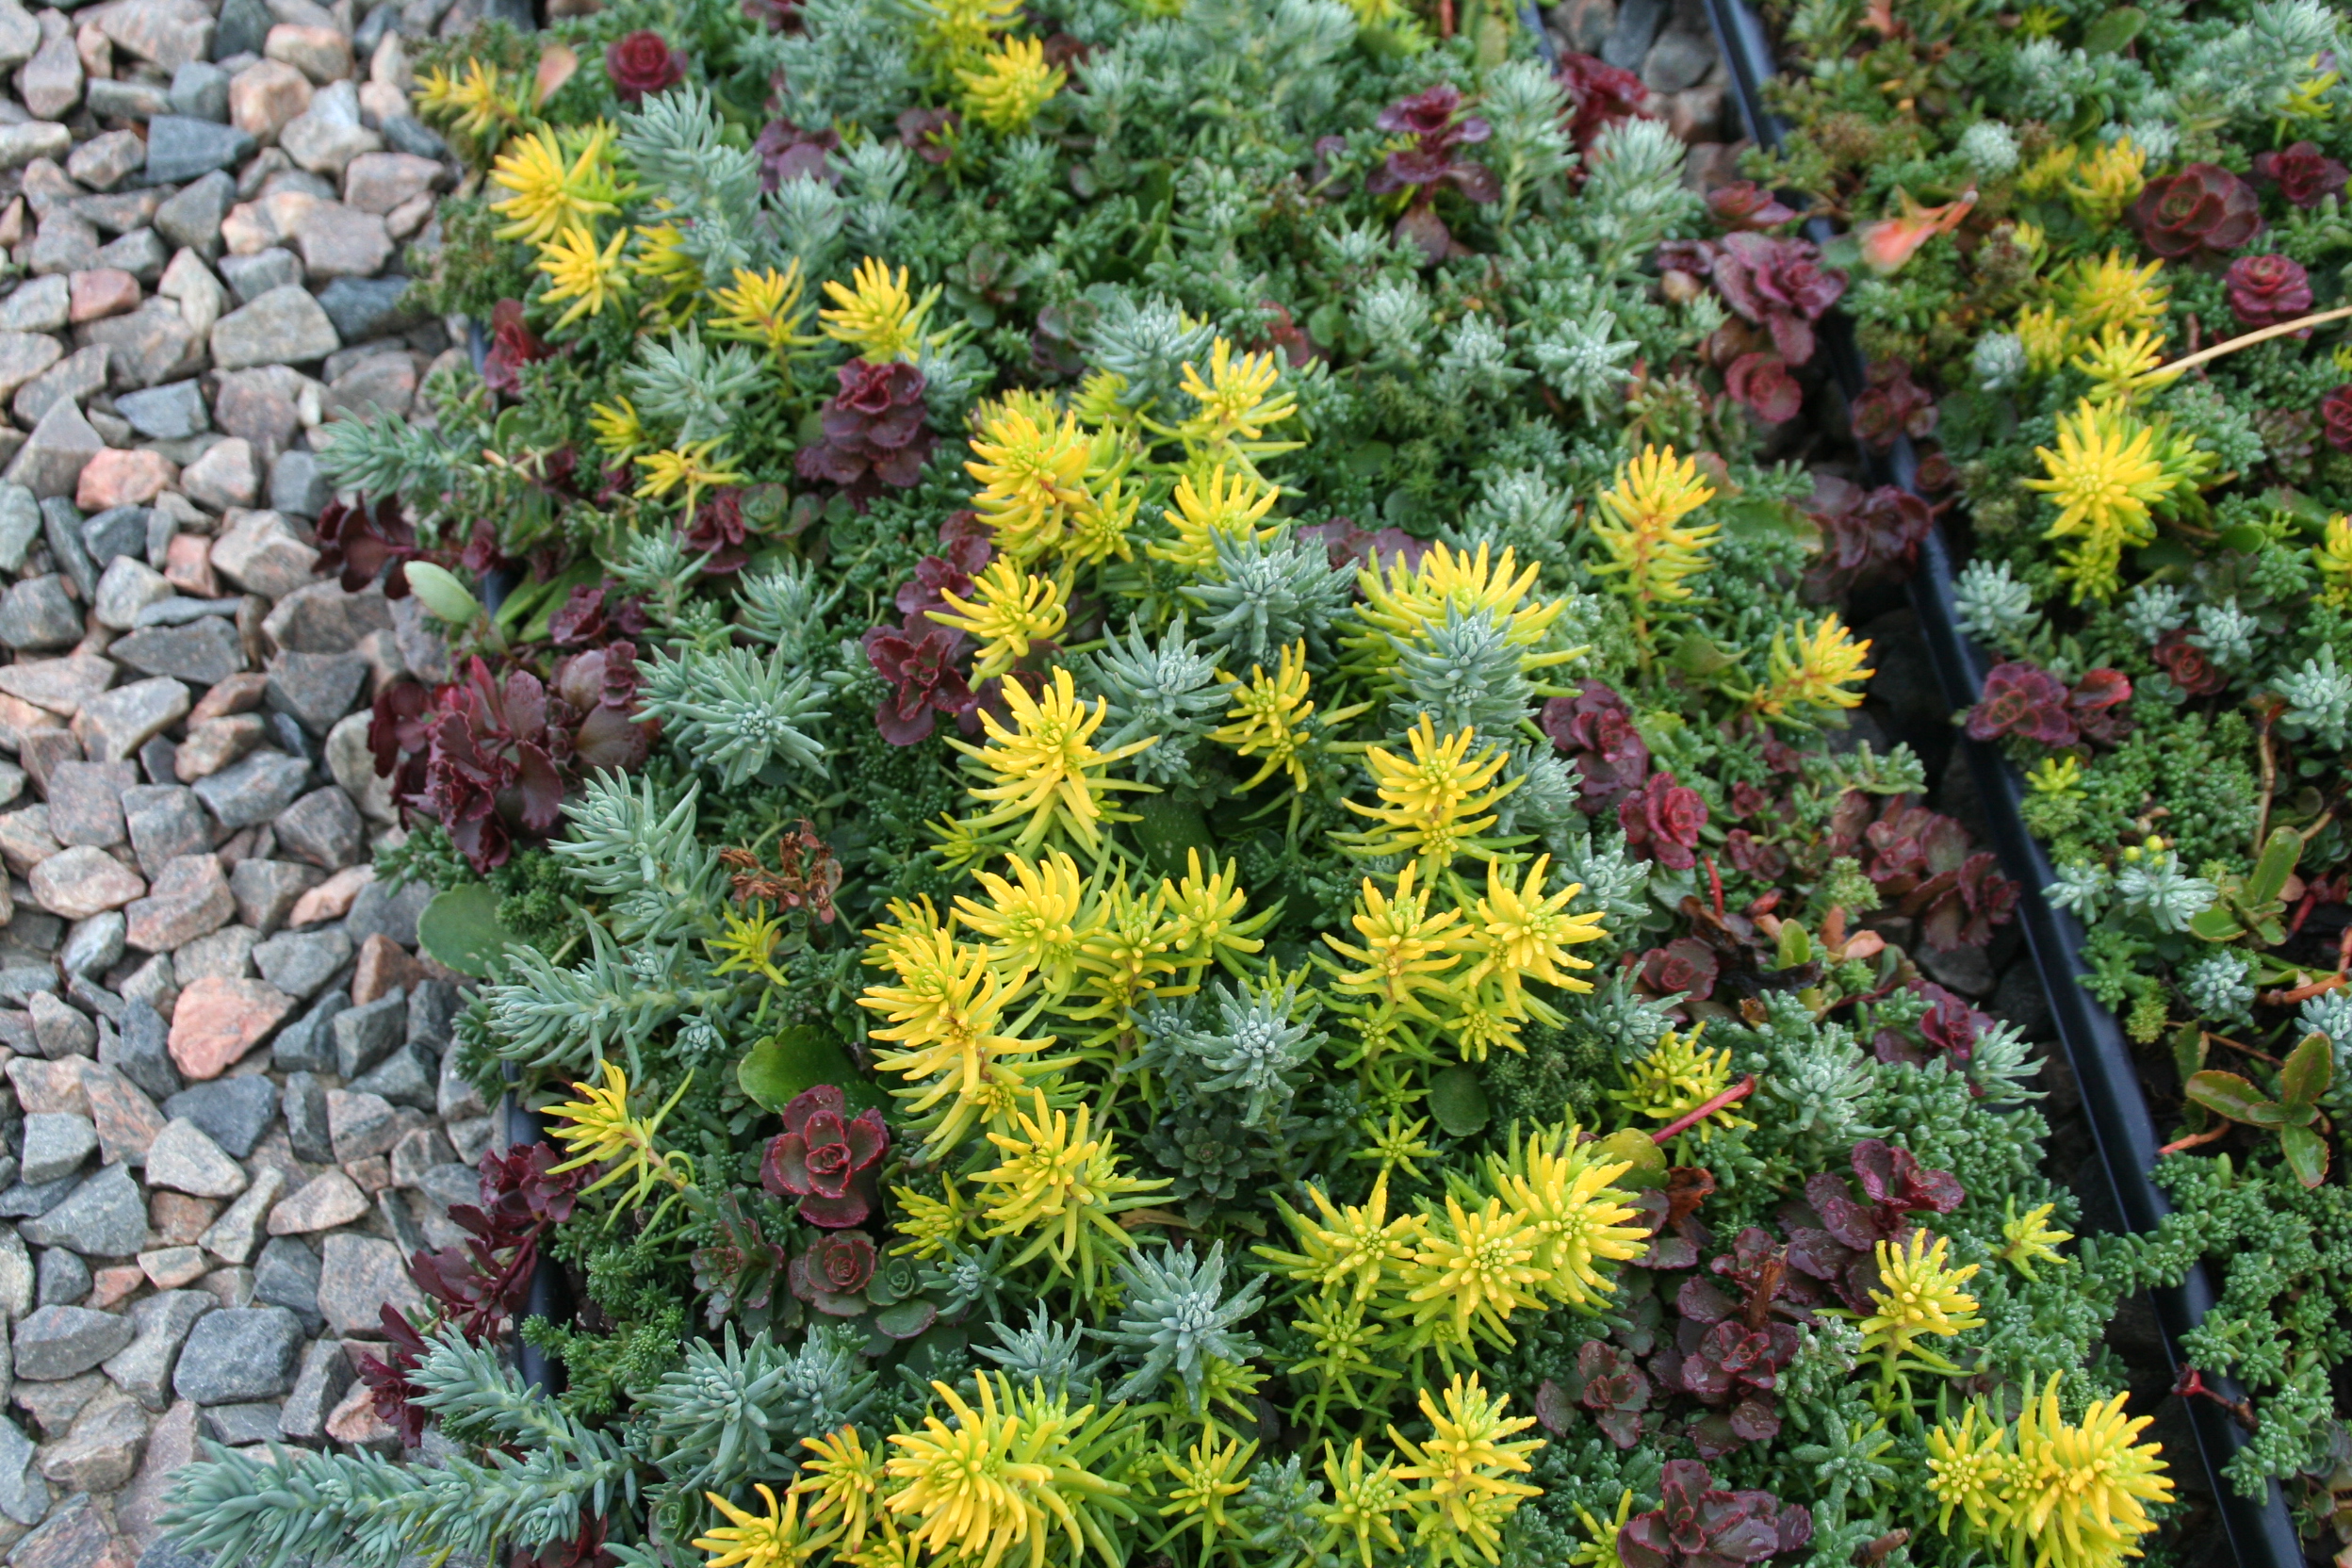 For an instant sedum or perennial bed, use the new Drop and Grow® collections from Costa Farms, featuring sedum tile mats and annual/perennial trays that are grown in long, narrow strips.